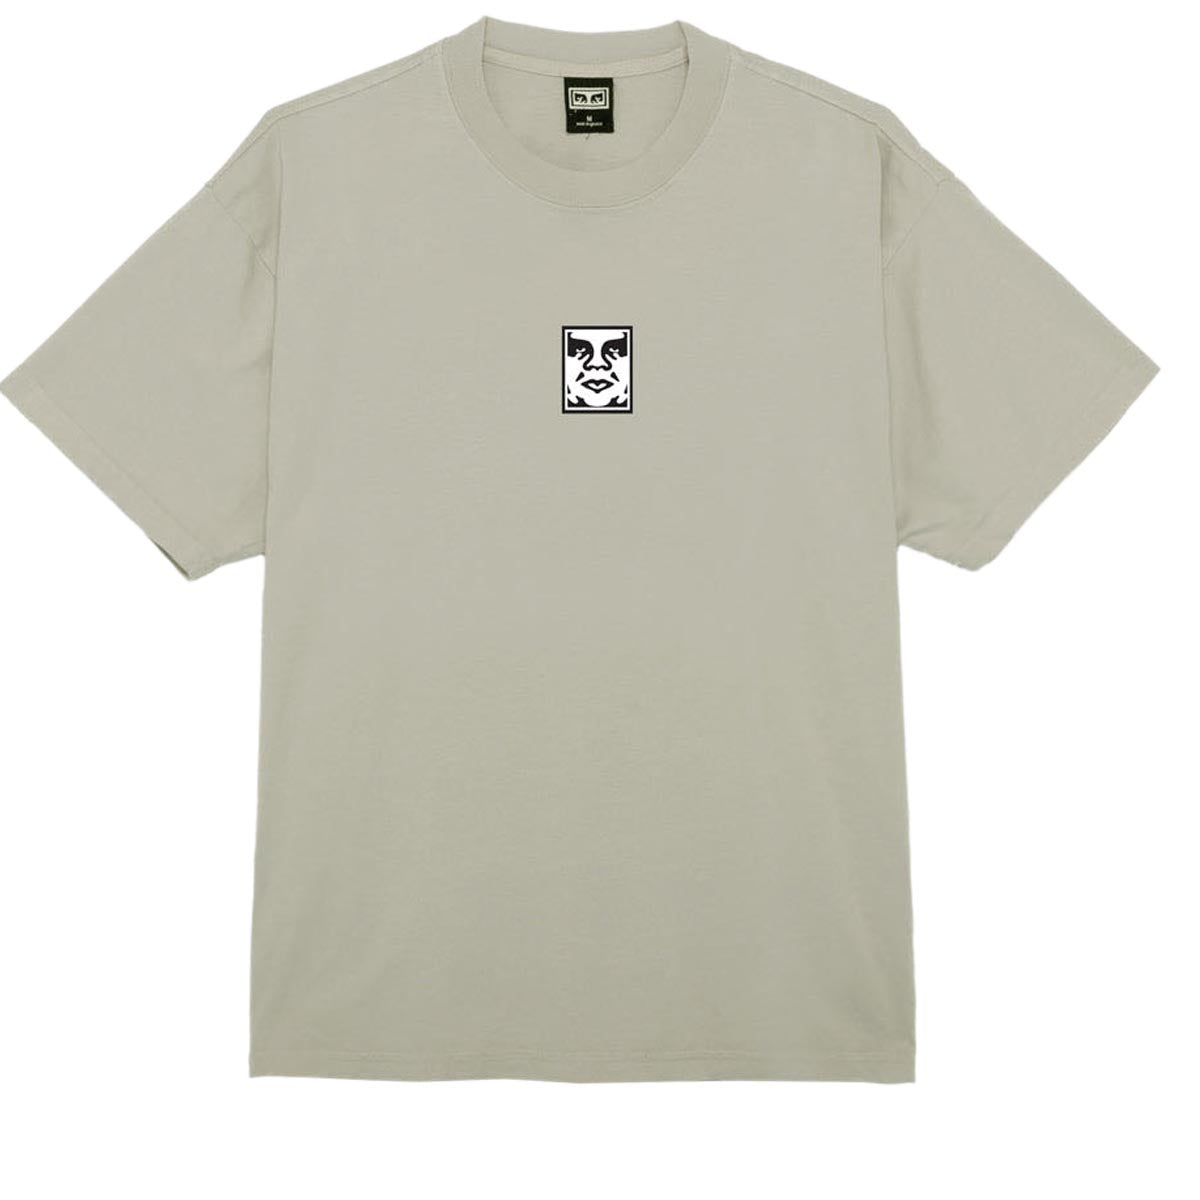 Obey Icon Heavyweight T-Shirt - Silver Grey image 1